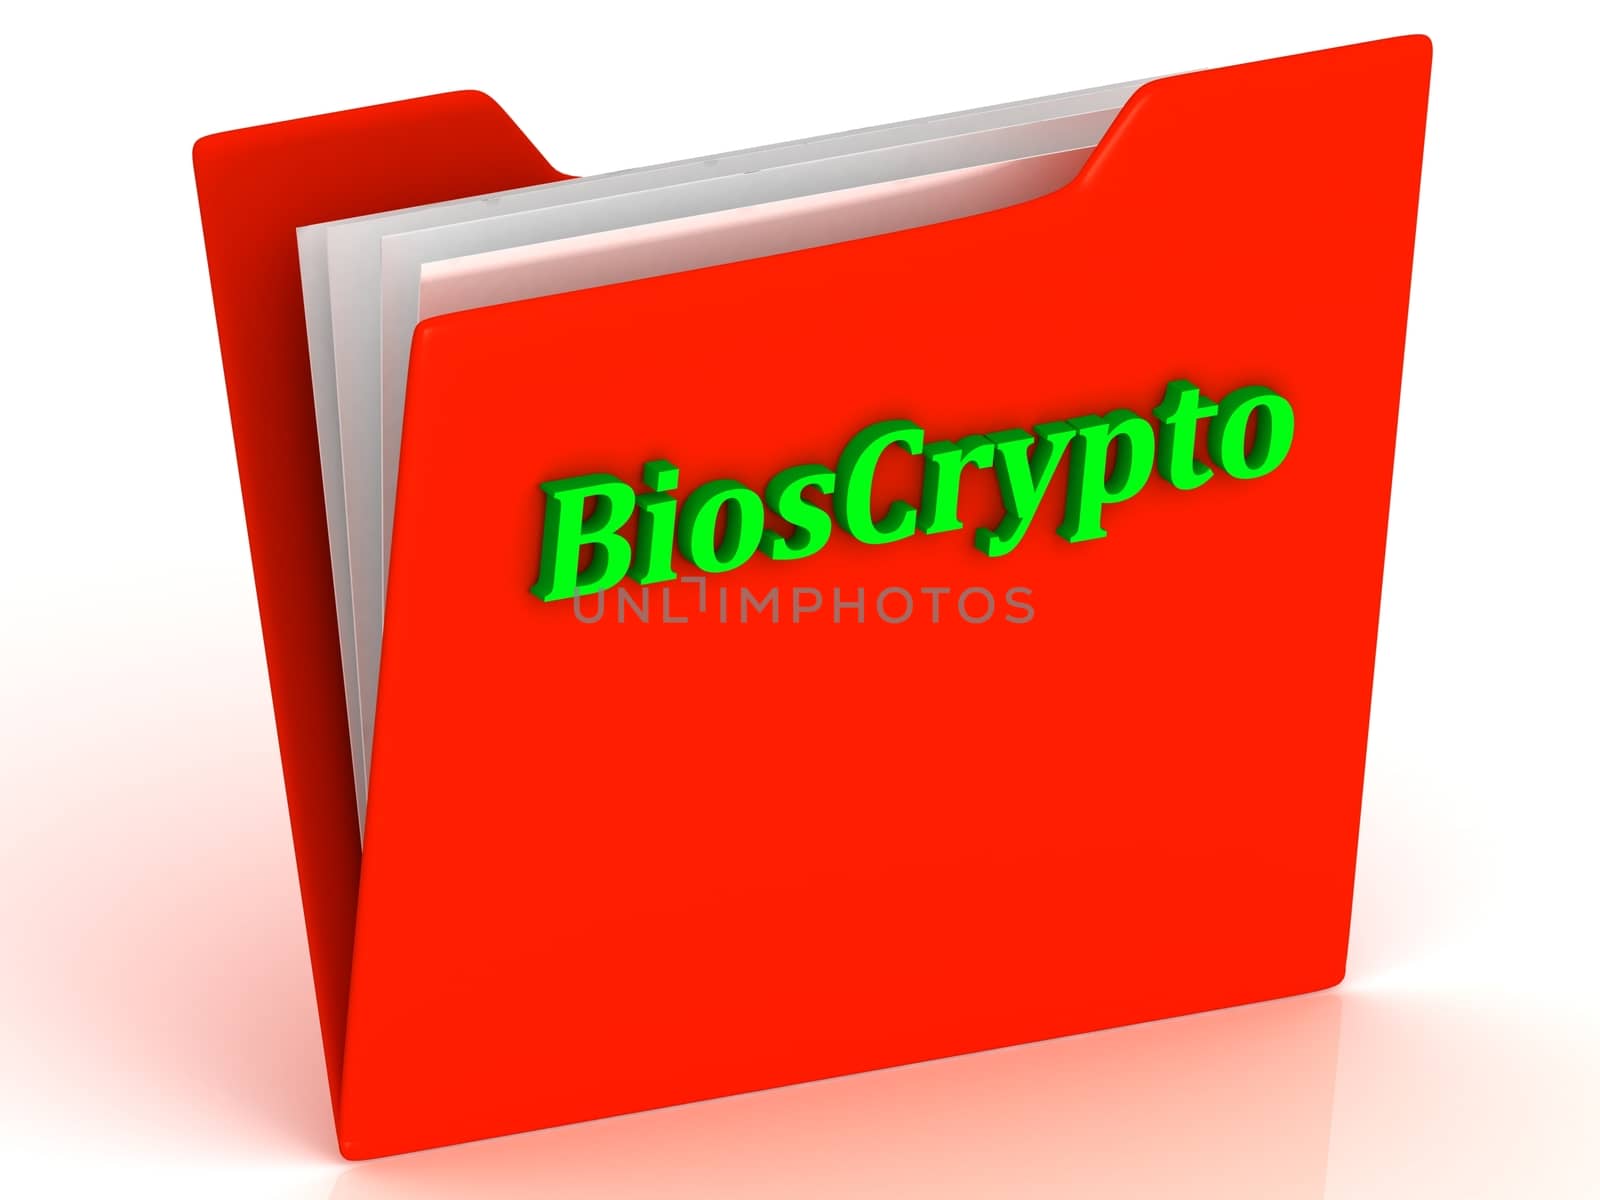 BiosCrypto- bright green letters on a gold folder by GreenMost